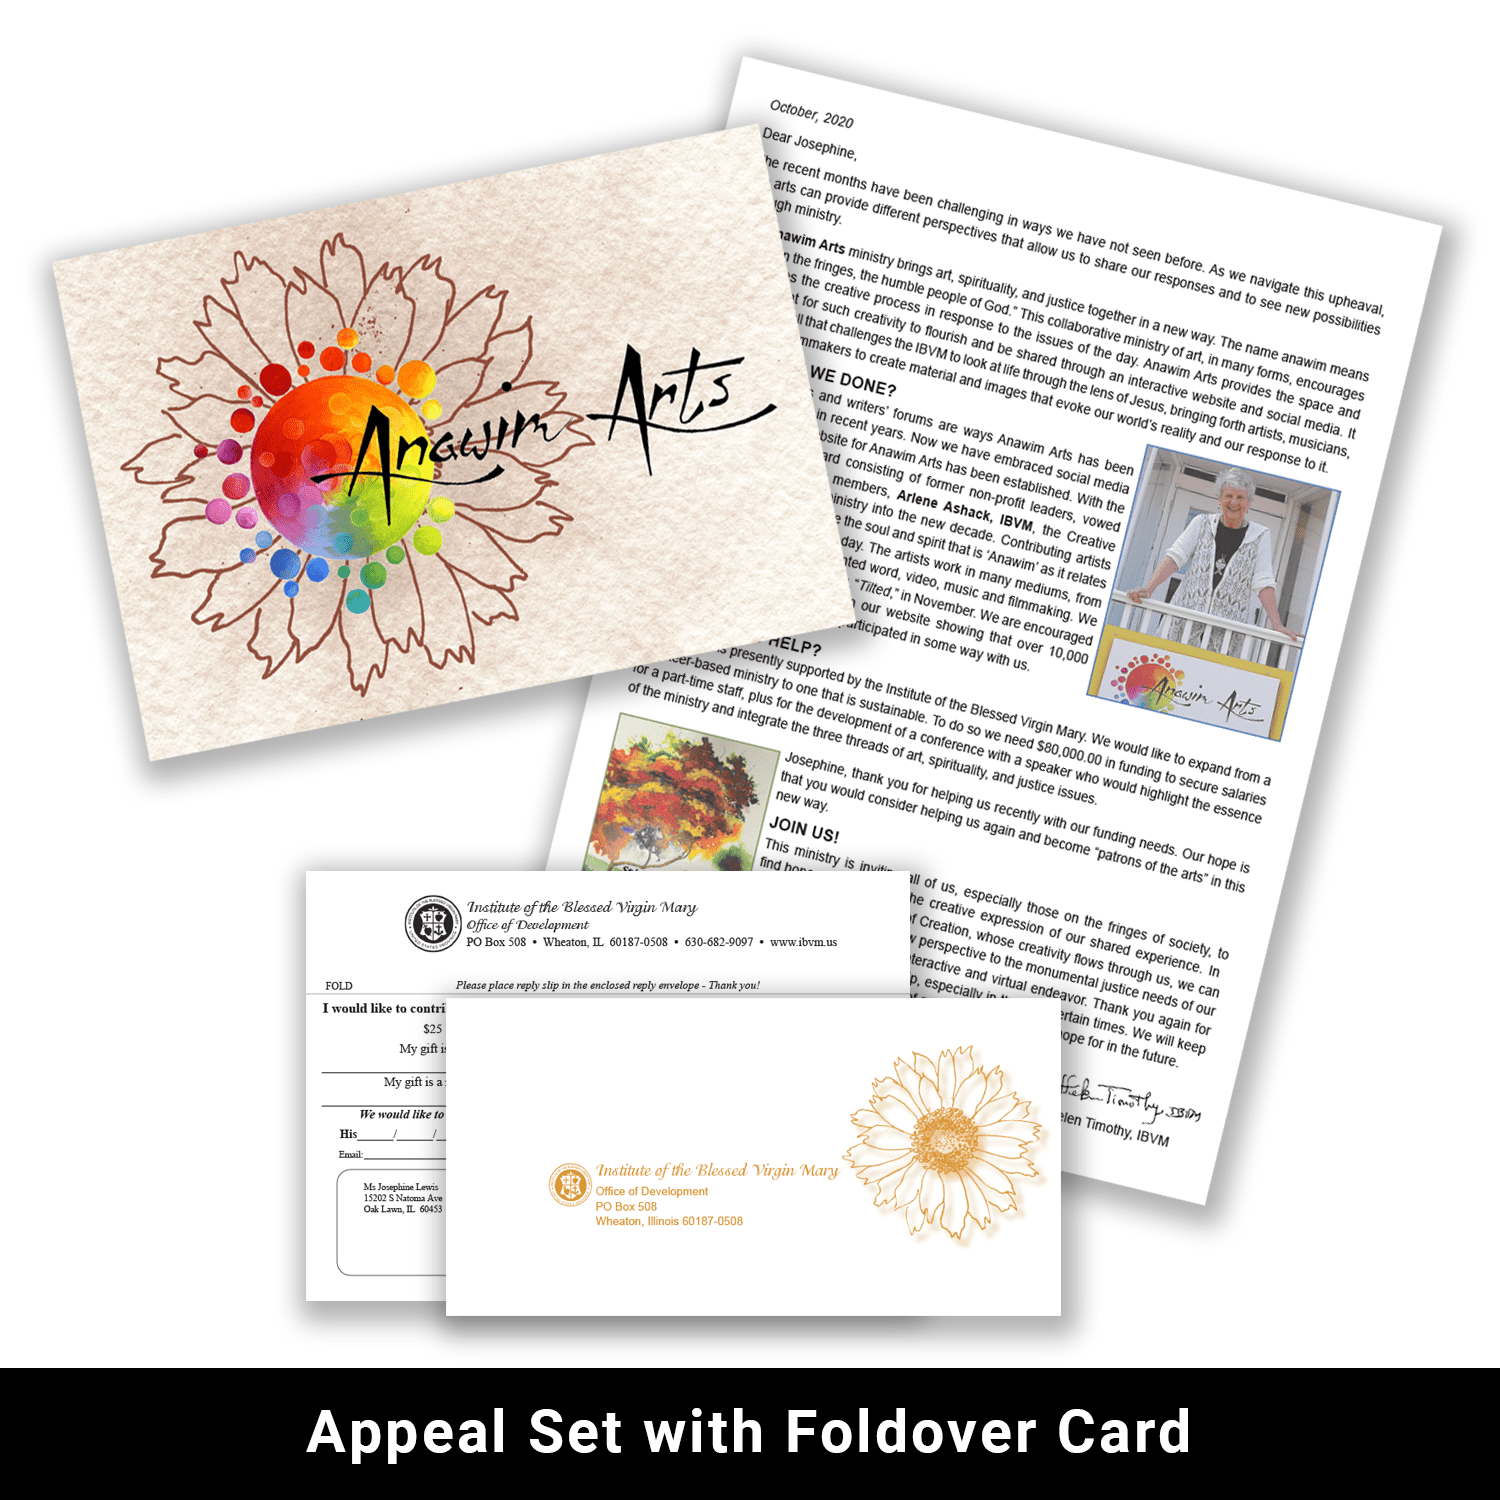 Print appeal set with foldover card example